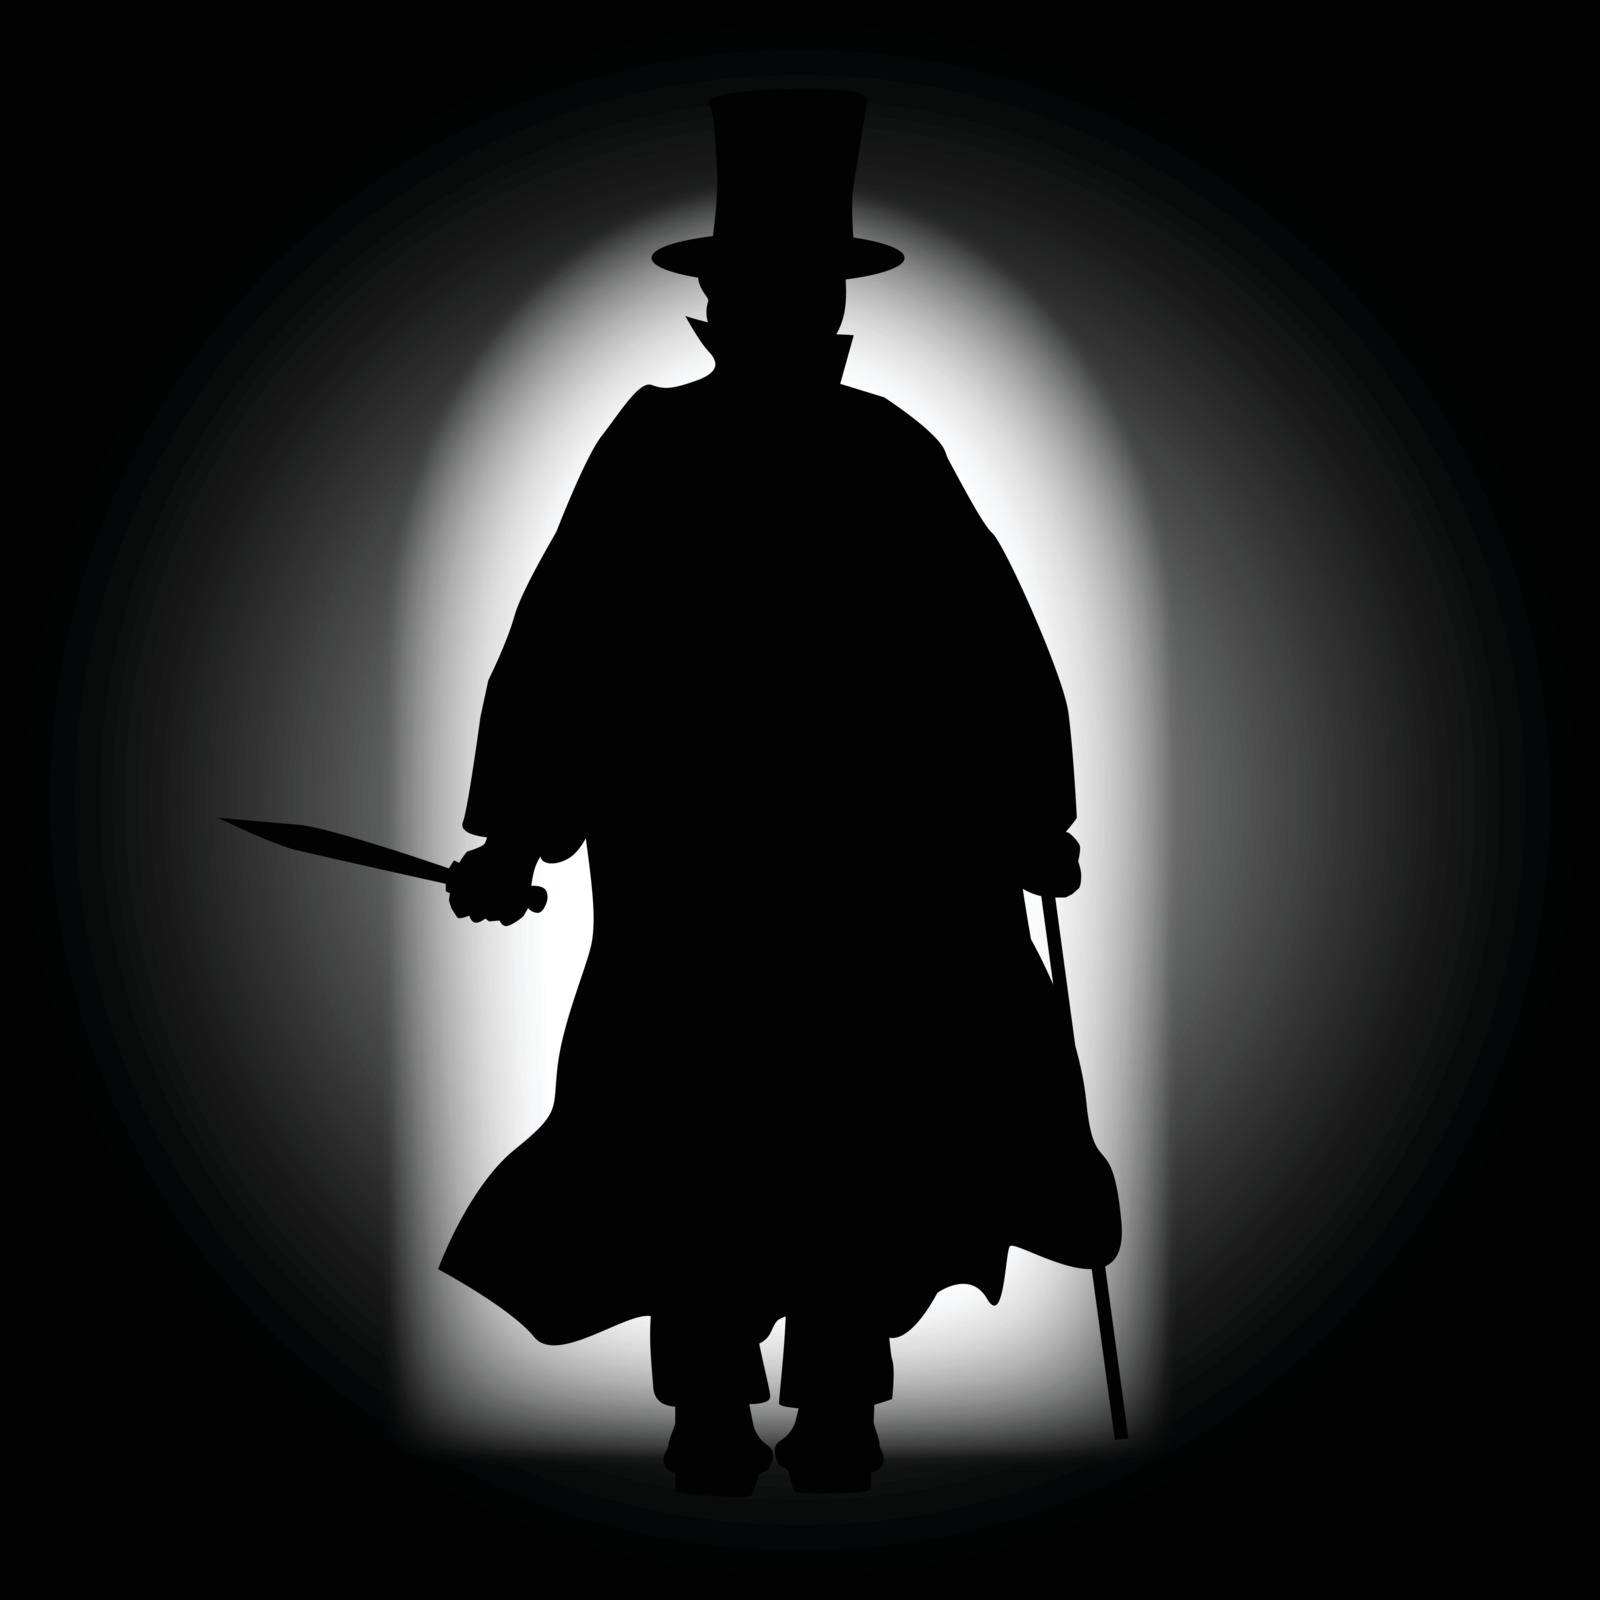 Jack the Ripper walking through a dark alleyway with the light behind